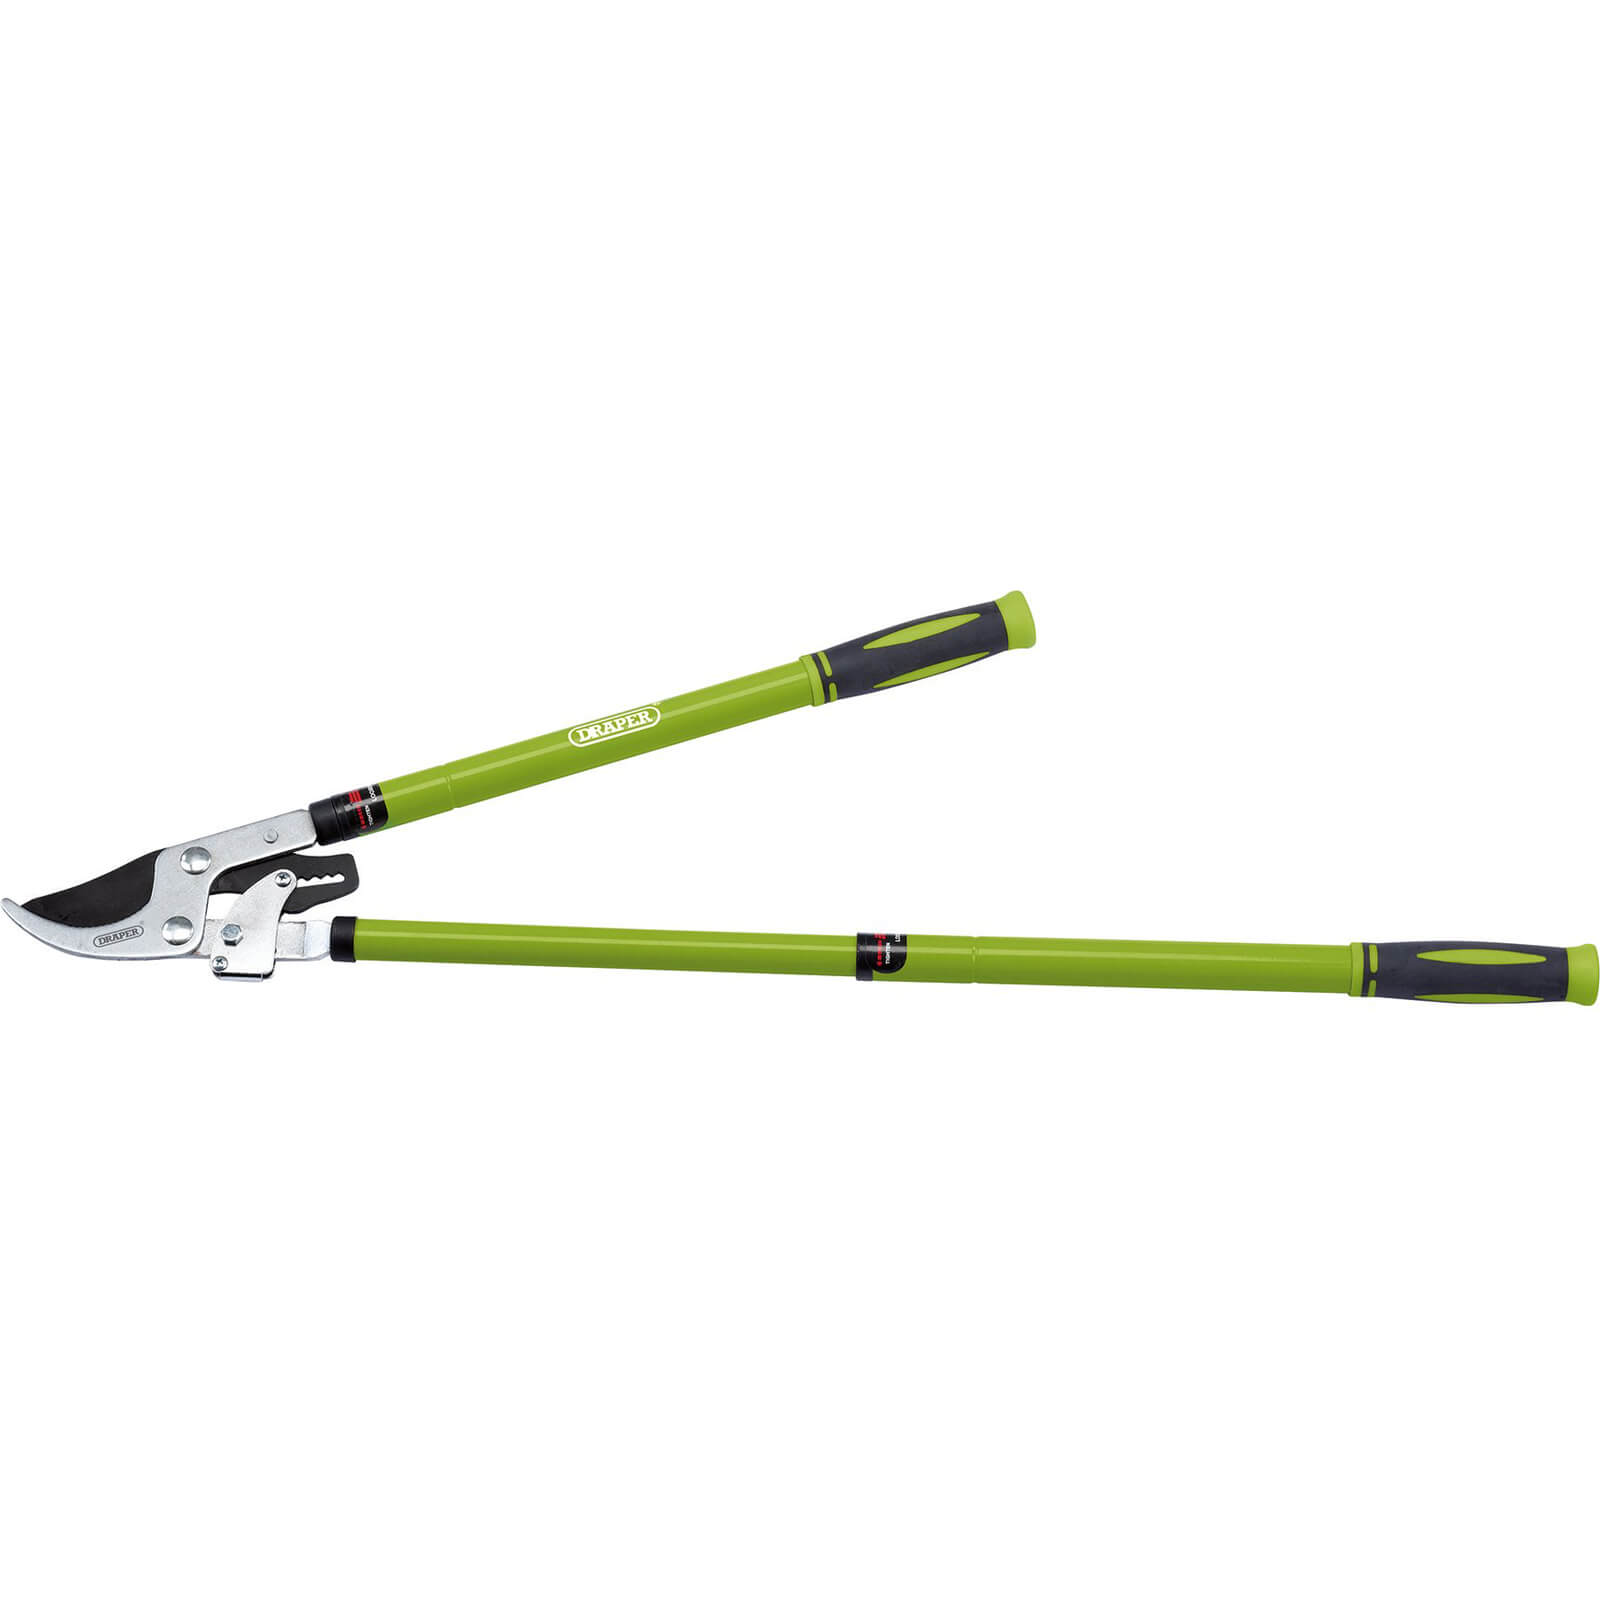 Photo of Draper Telescopic Ratchet Action Bypass Loppers 800mm